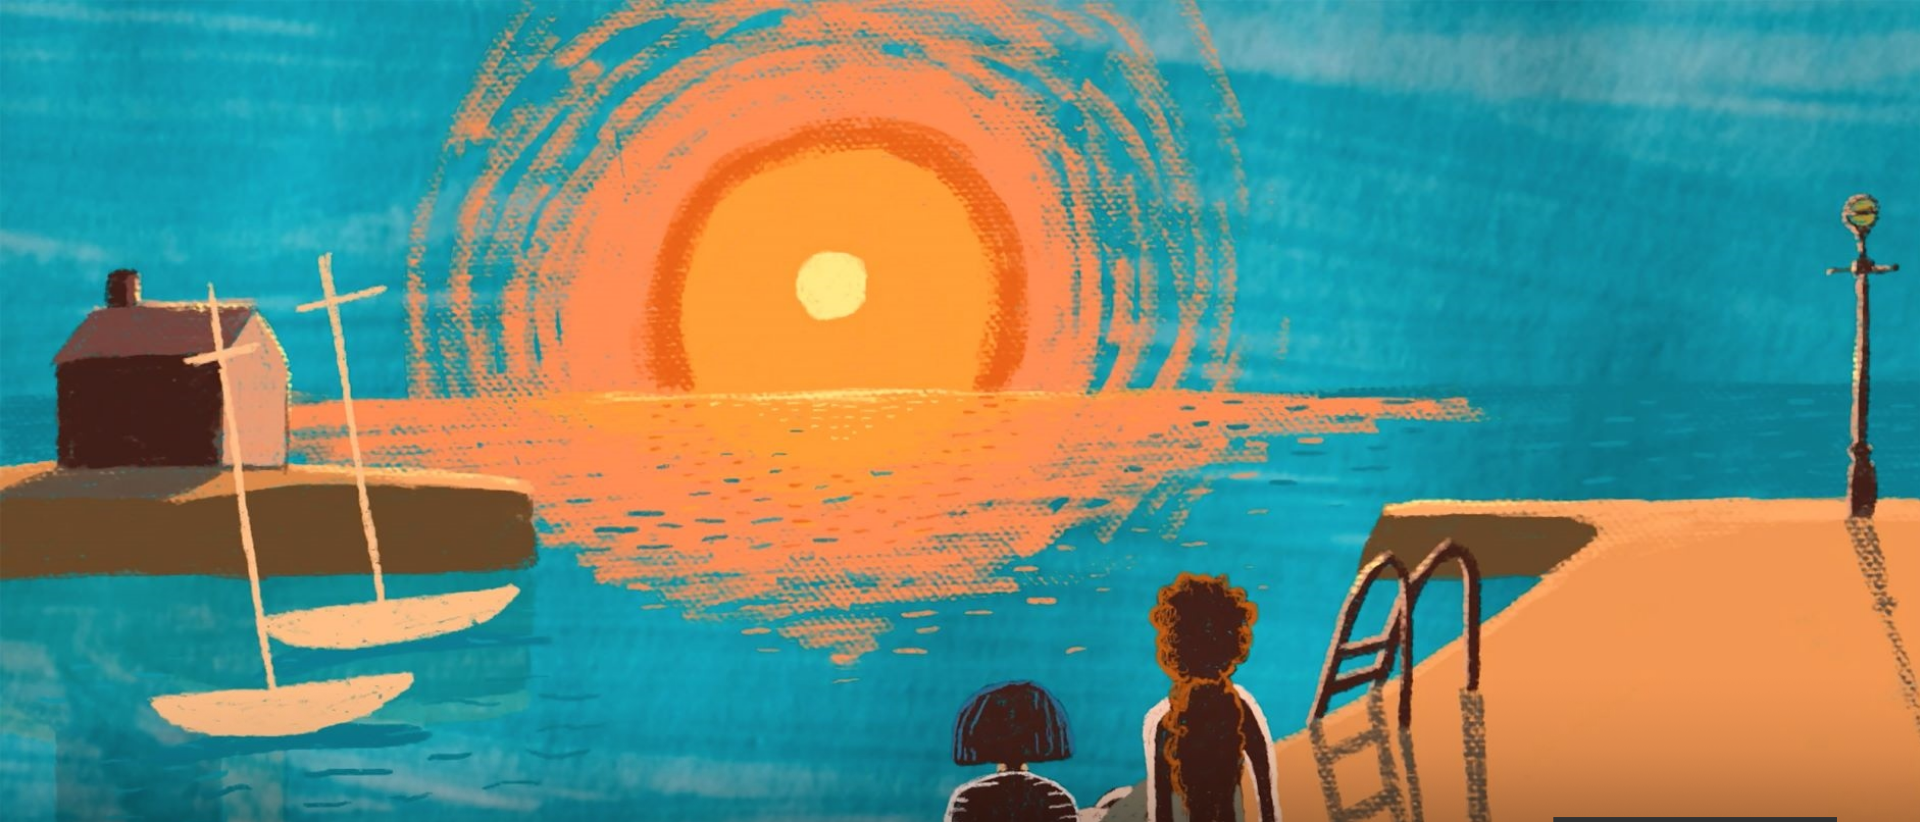 a still from animated film cwch deilen featuring two woman watching a sunset on a dock